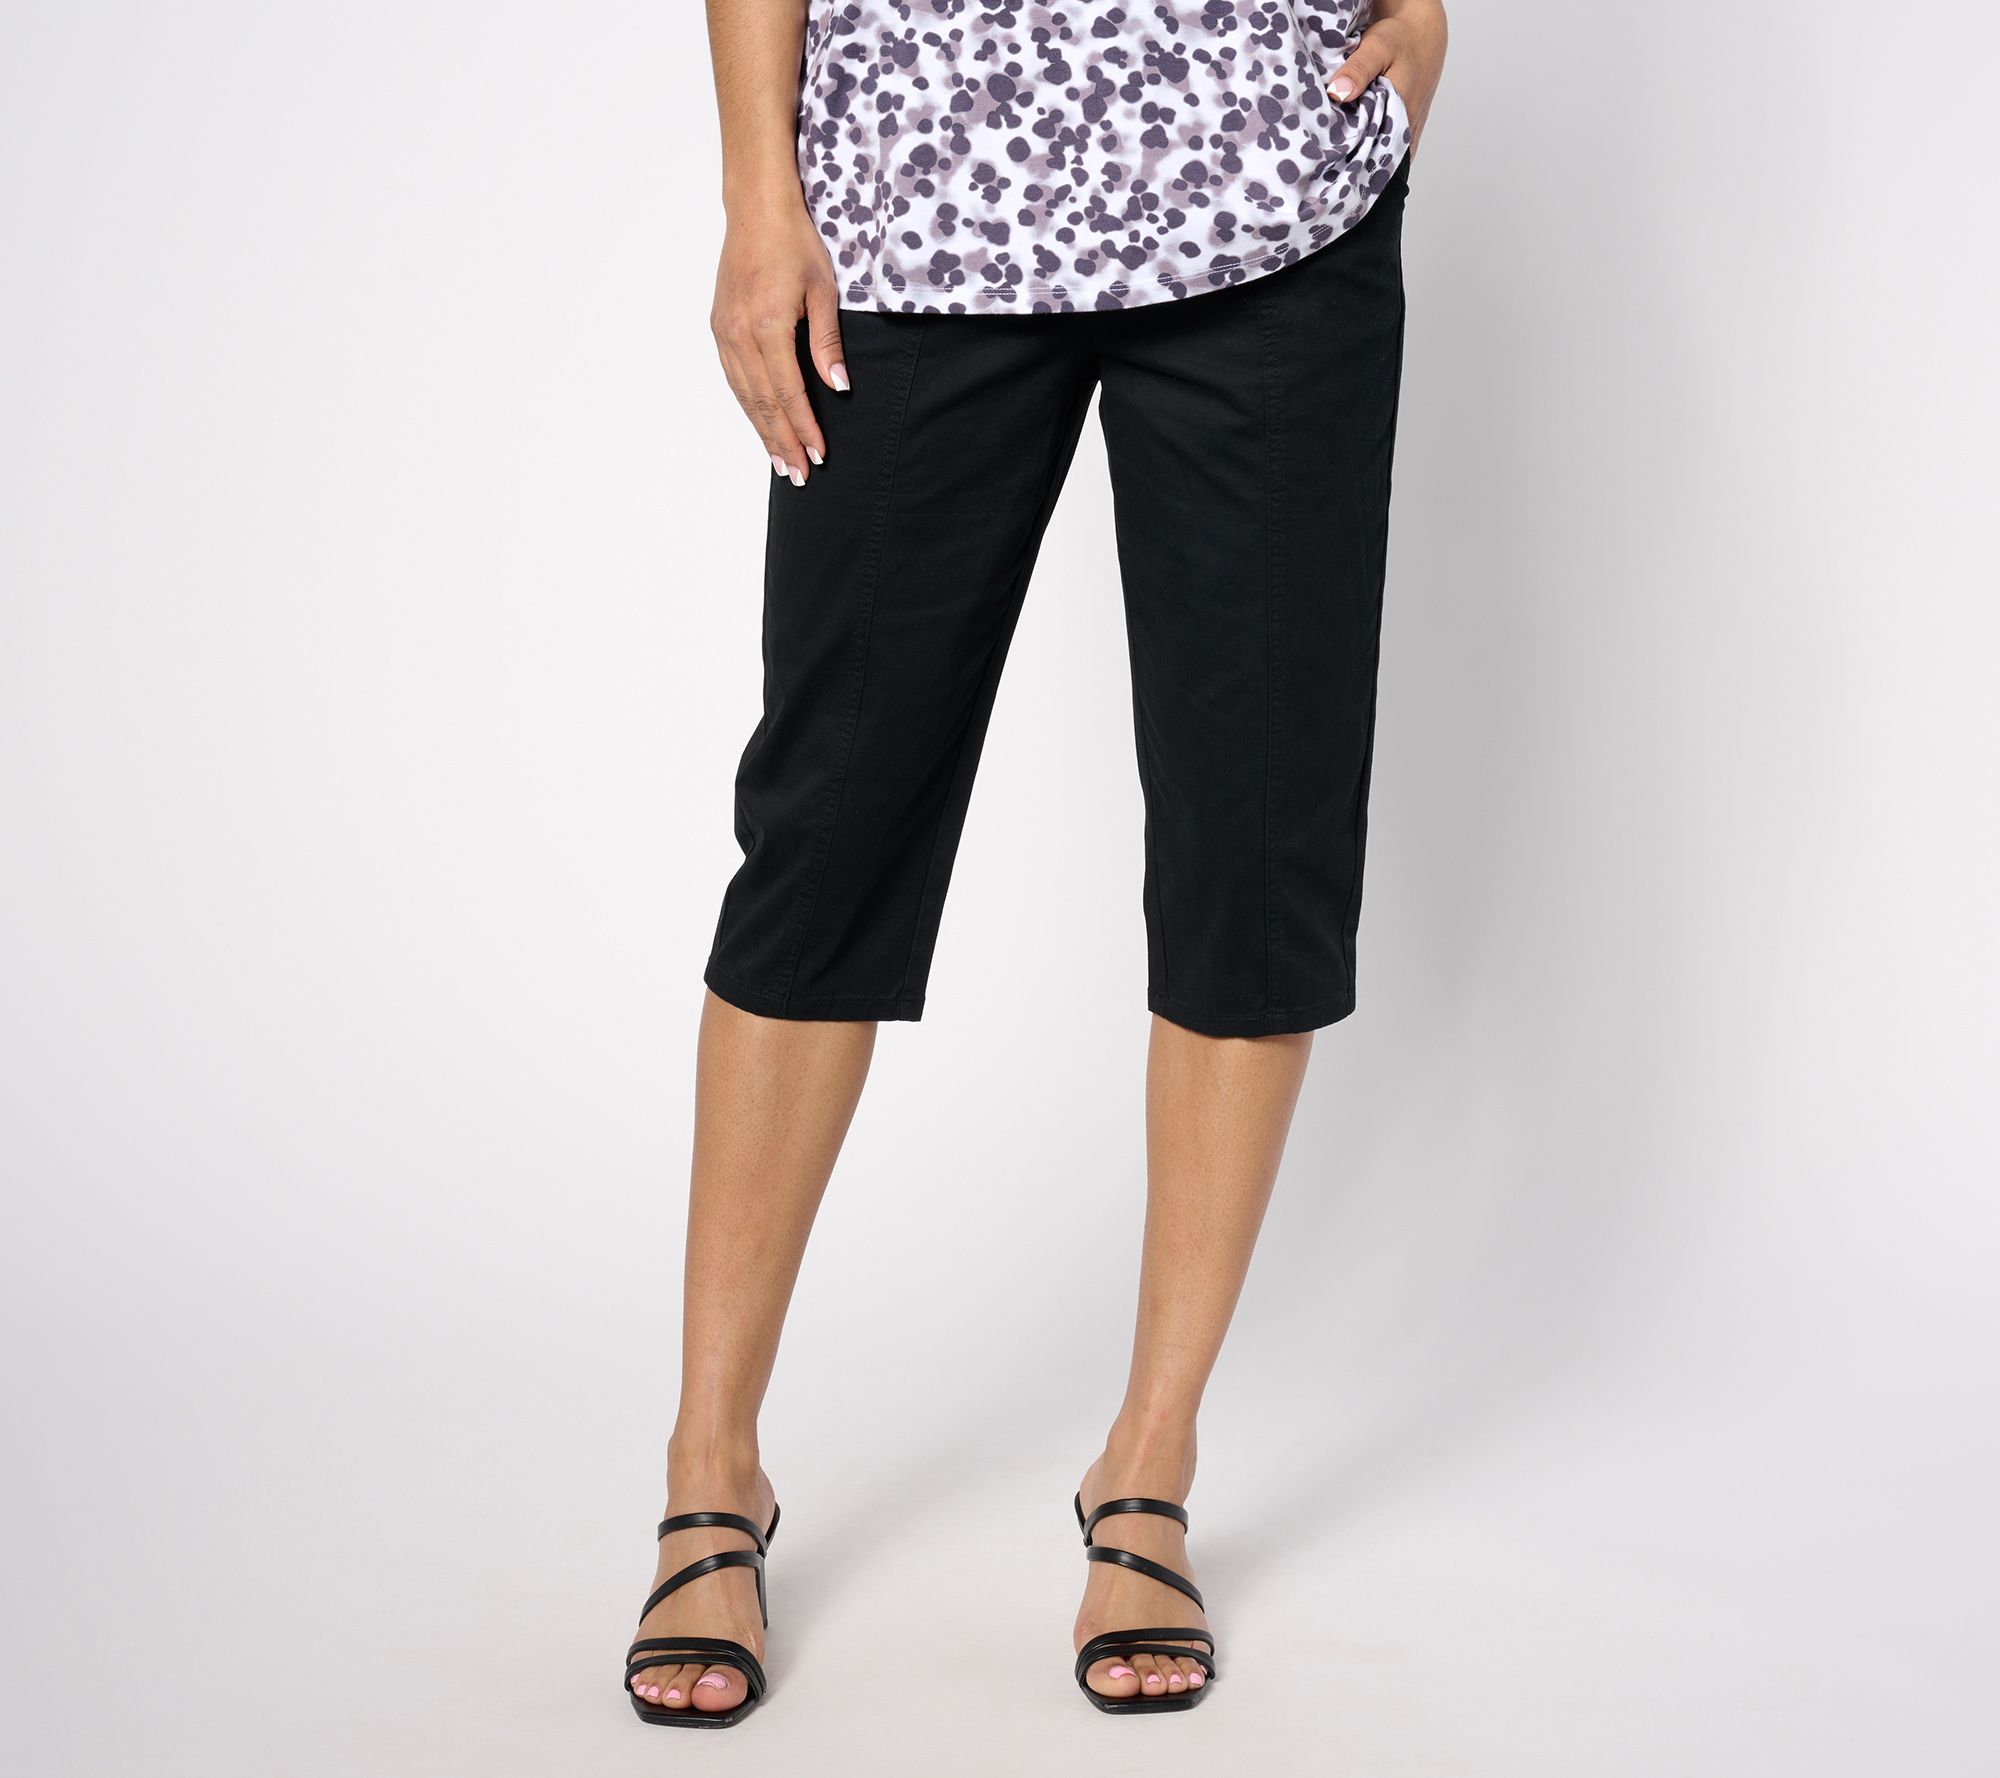 Petite Sonoma Goods For Life® Cuffed Twill Skimmer Pants